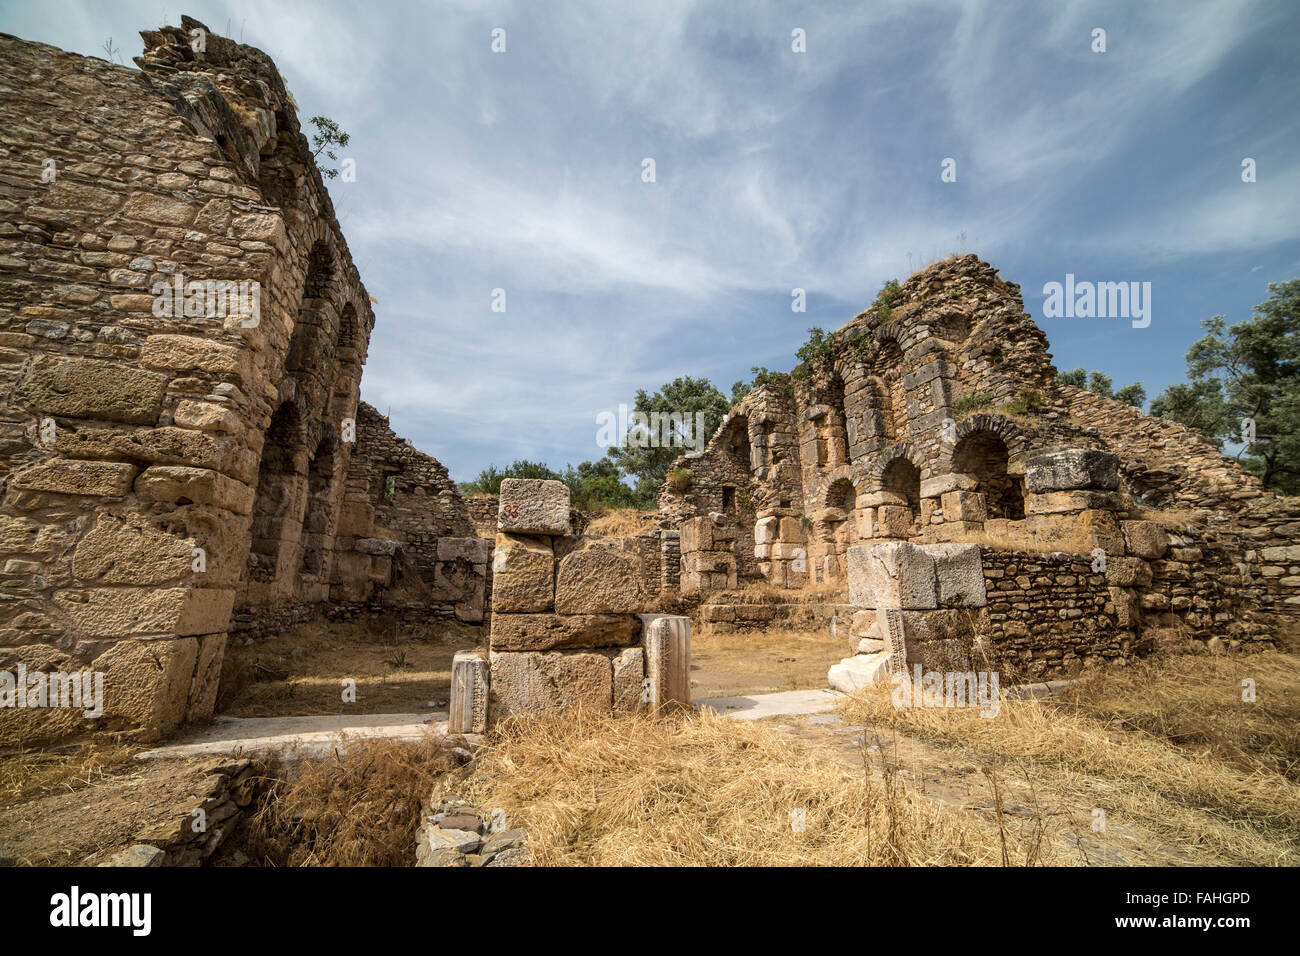 Nysa was Ancient City of Caria. Now in the Sultanhisar district of Aydın Province of Turkey Stock Photo